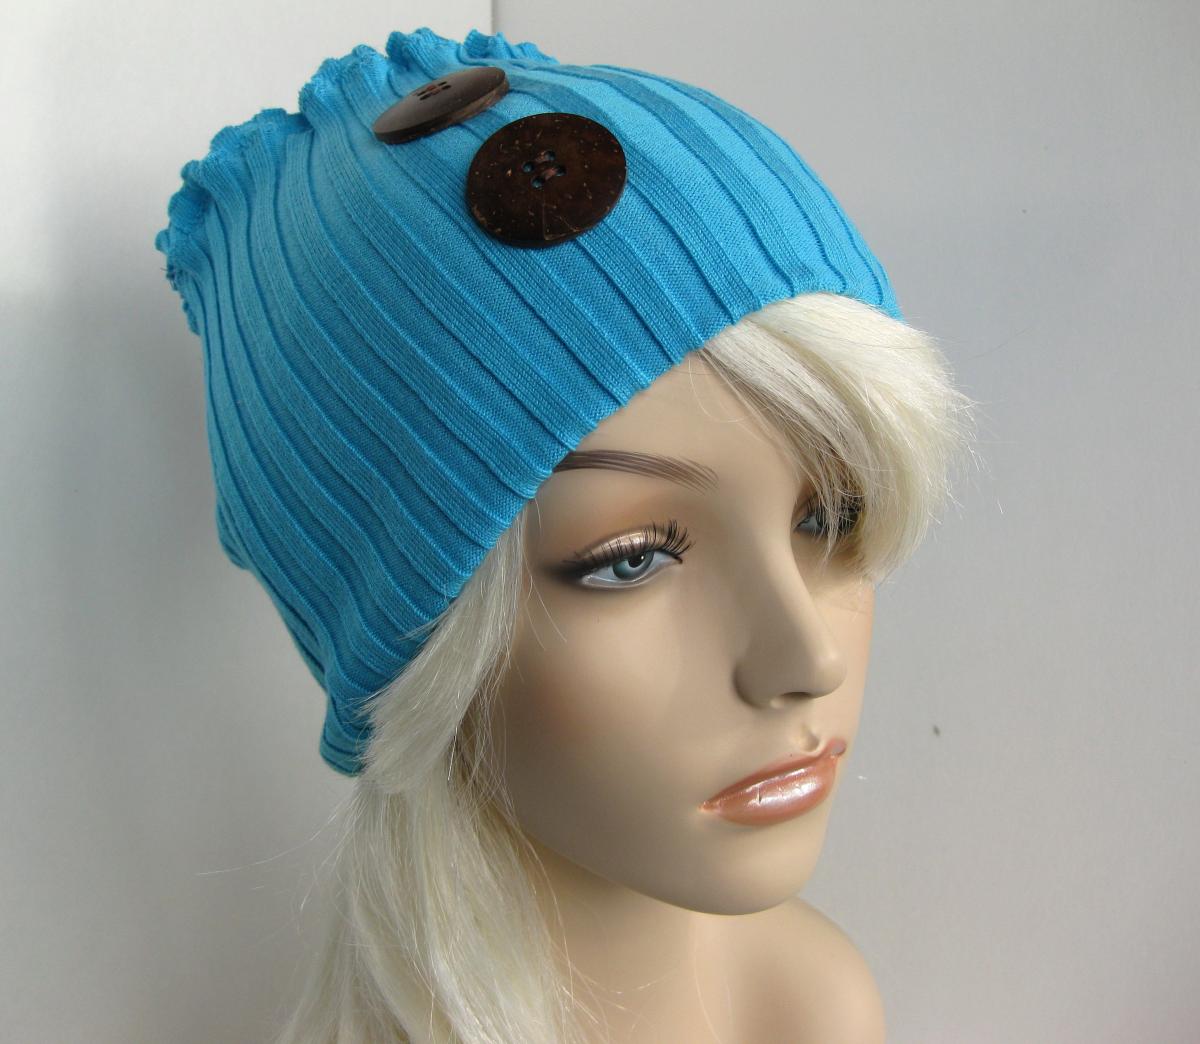 Natural Coconut Shell Button Head Ear Warmer Hat Sweater Stretch Headband Upcycled Head Wrap Dread Wrap Teal Blue Women's Accessories